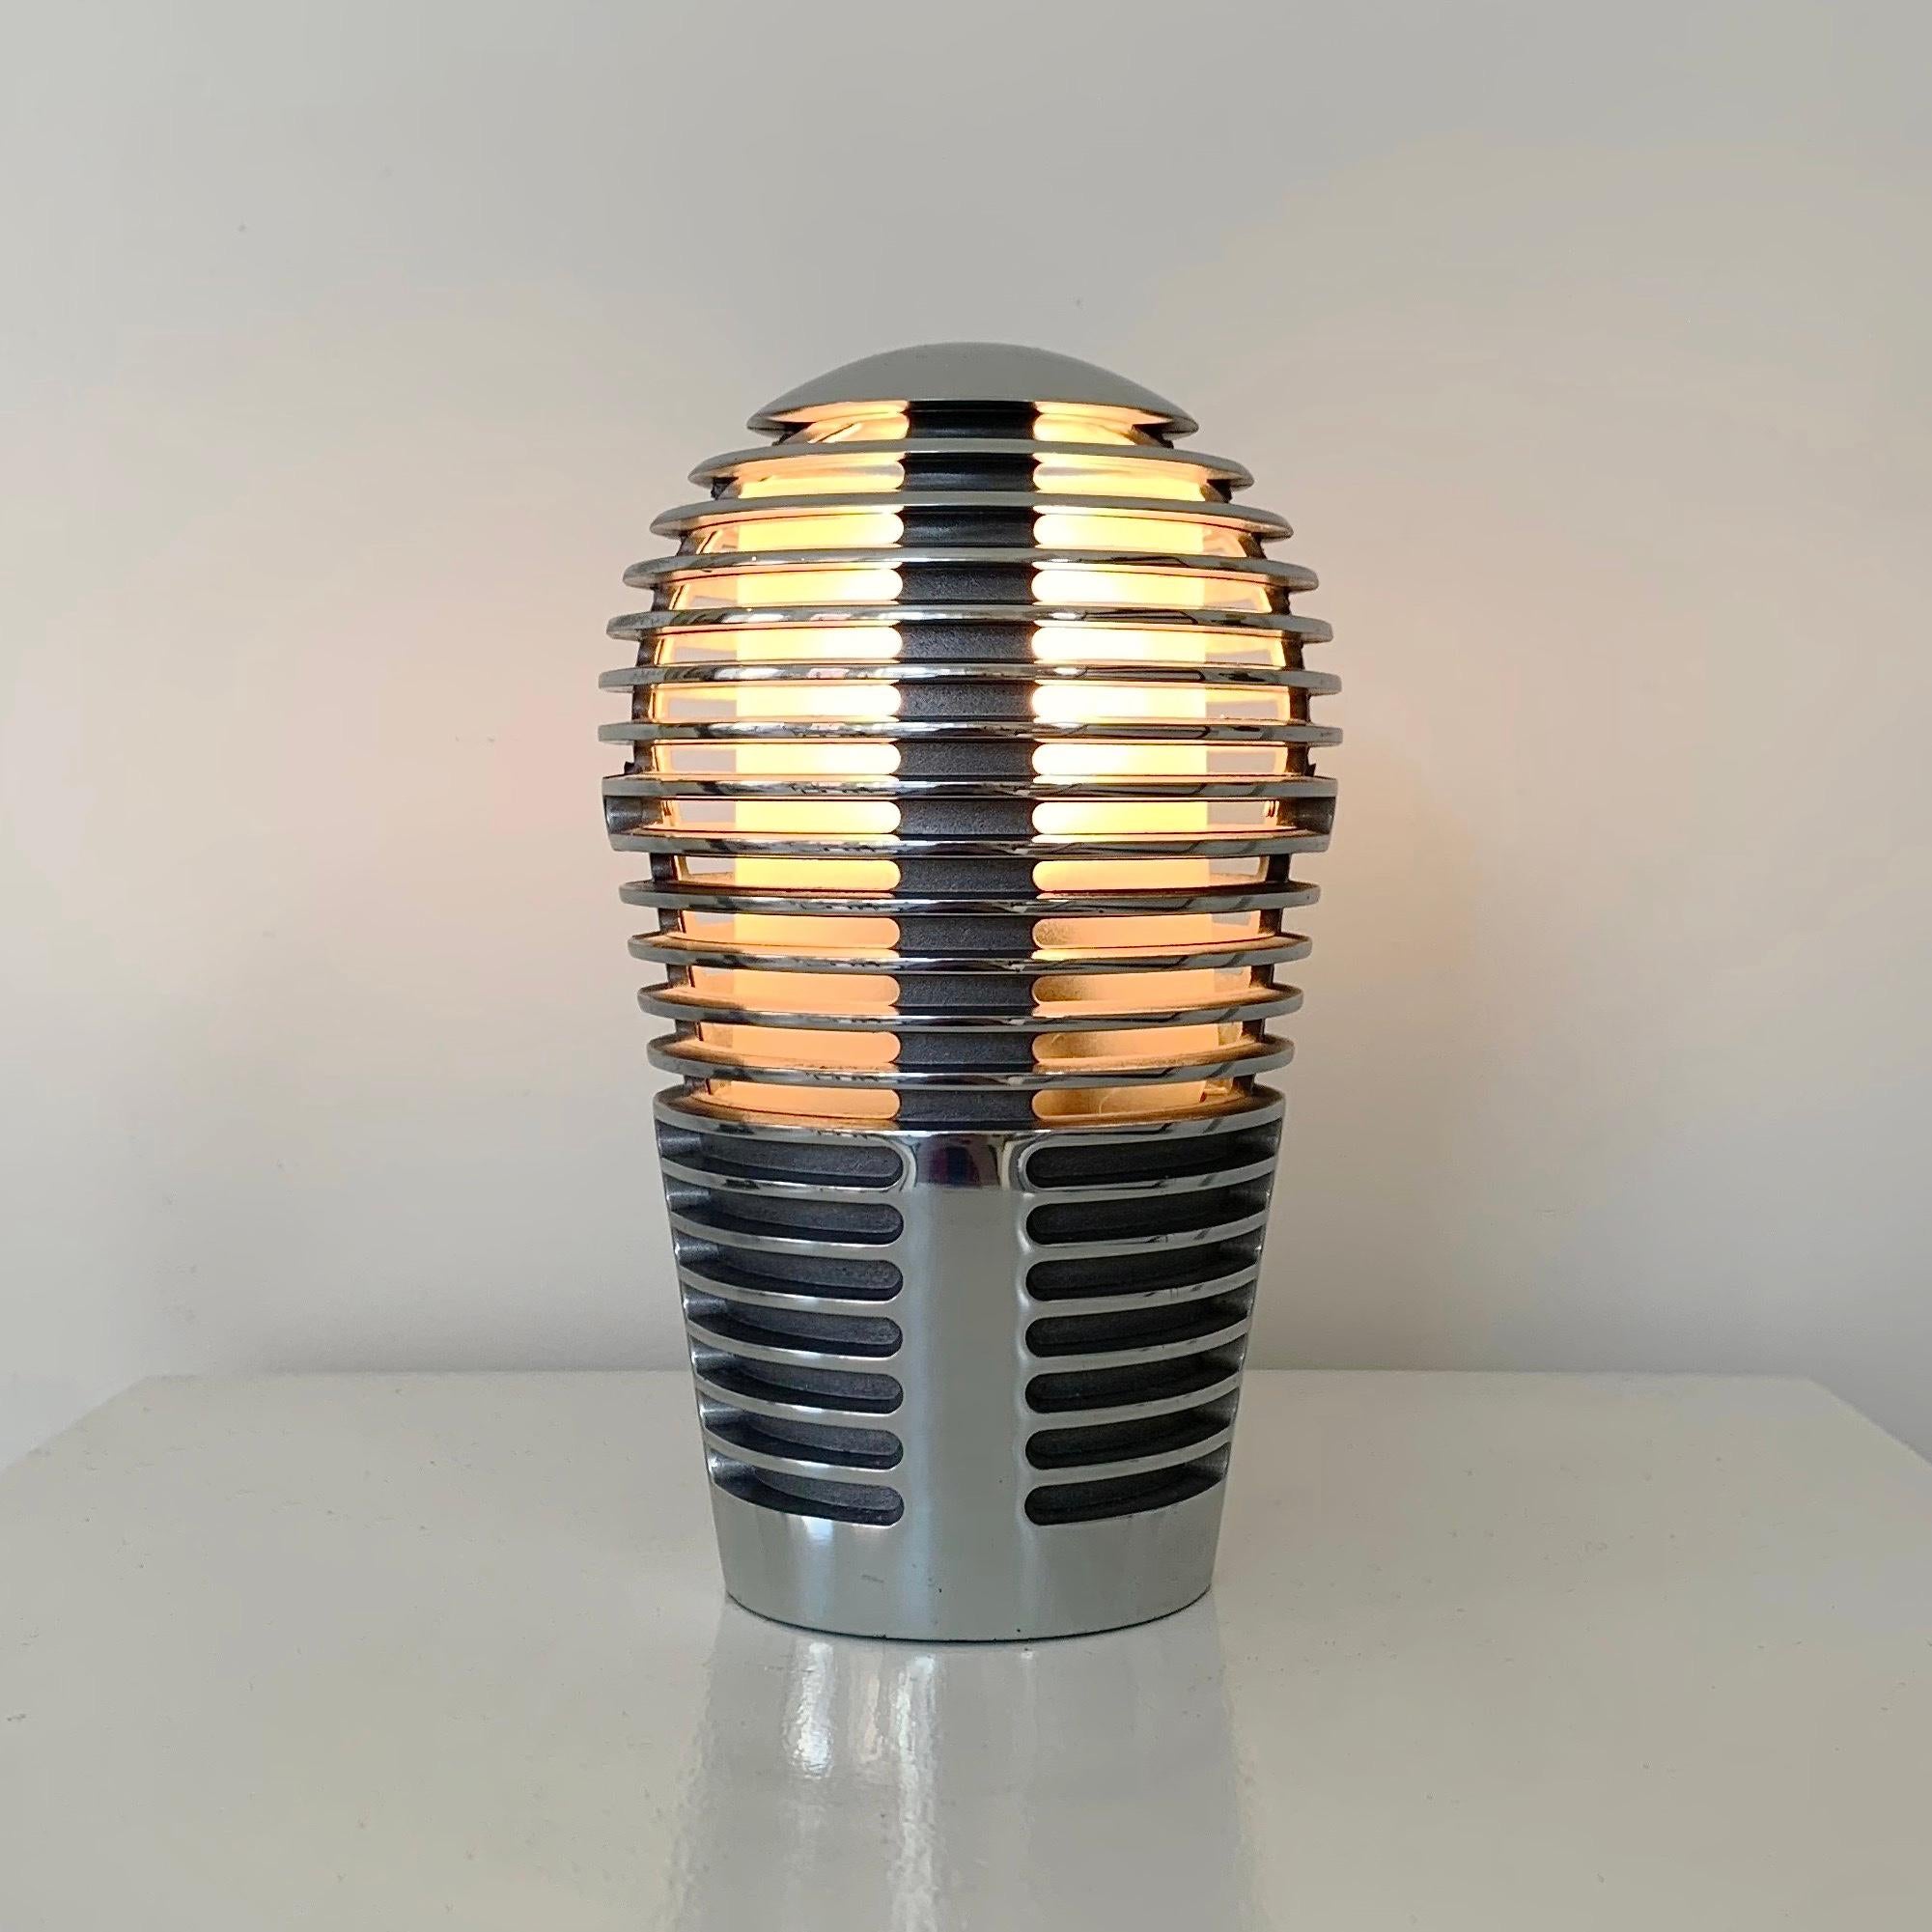 Sergi & Oscar Devesa Zen model table lamp for Metalarte, 1984, Spain.
Round radial ribbed conical chromed metal, polycarbonate screen inside.
Dimensions: 17 cm H, 11 cm diameter.
Marked undearneath.
Good original condition.
All purchases are covered